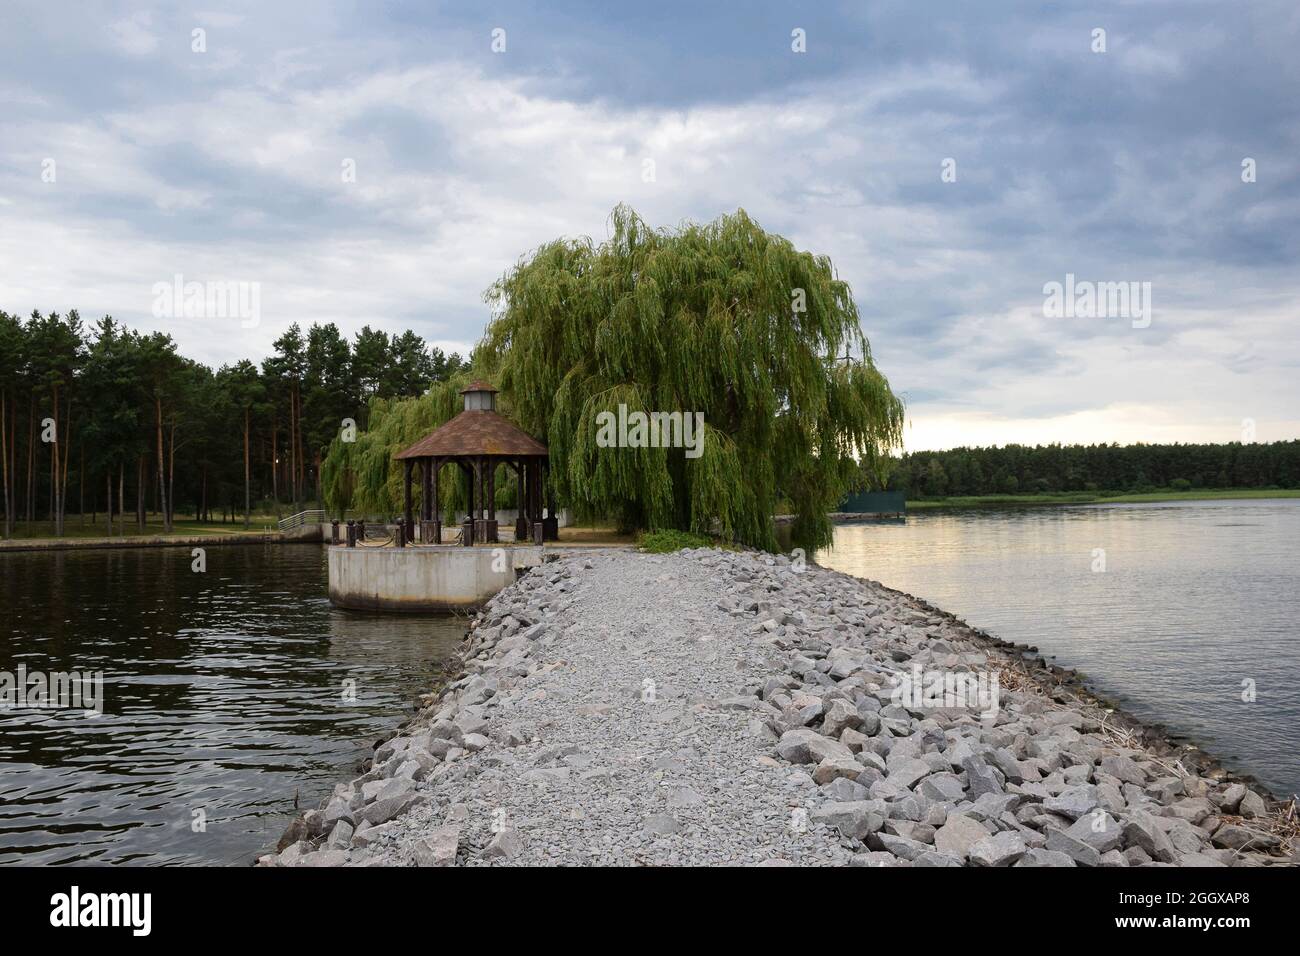 Gazebo under a large tree on the shore of a lake with a rocky embankment and a sky with clouds Stock Photo